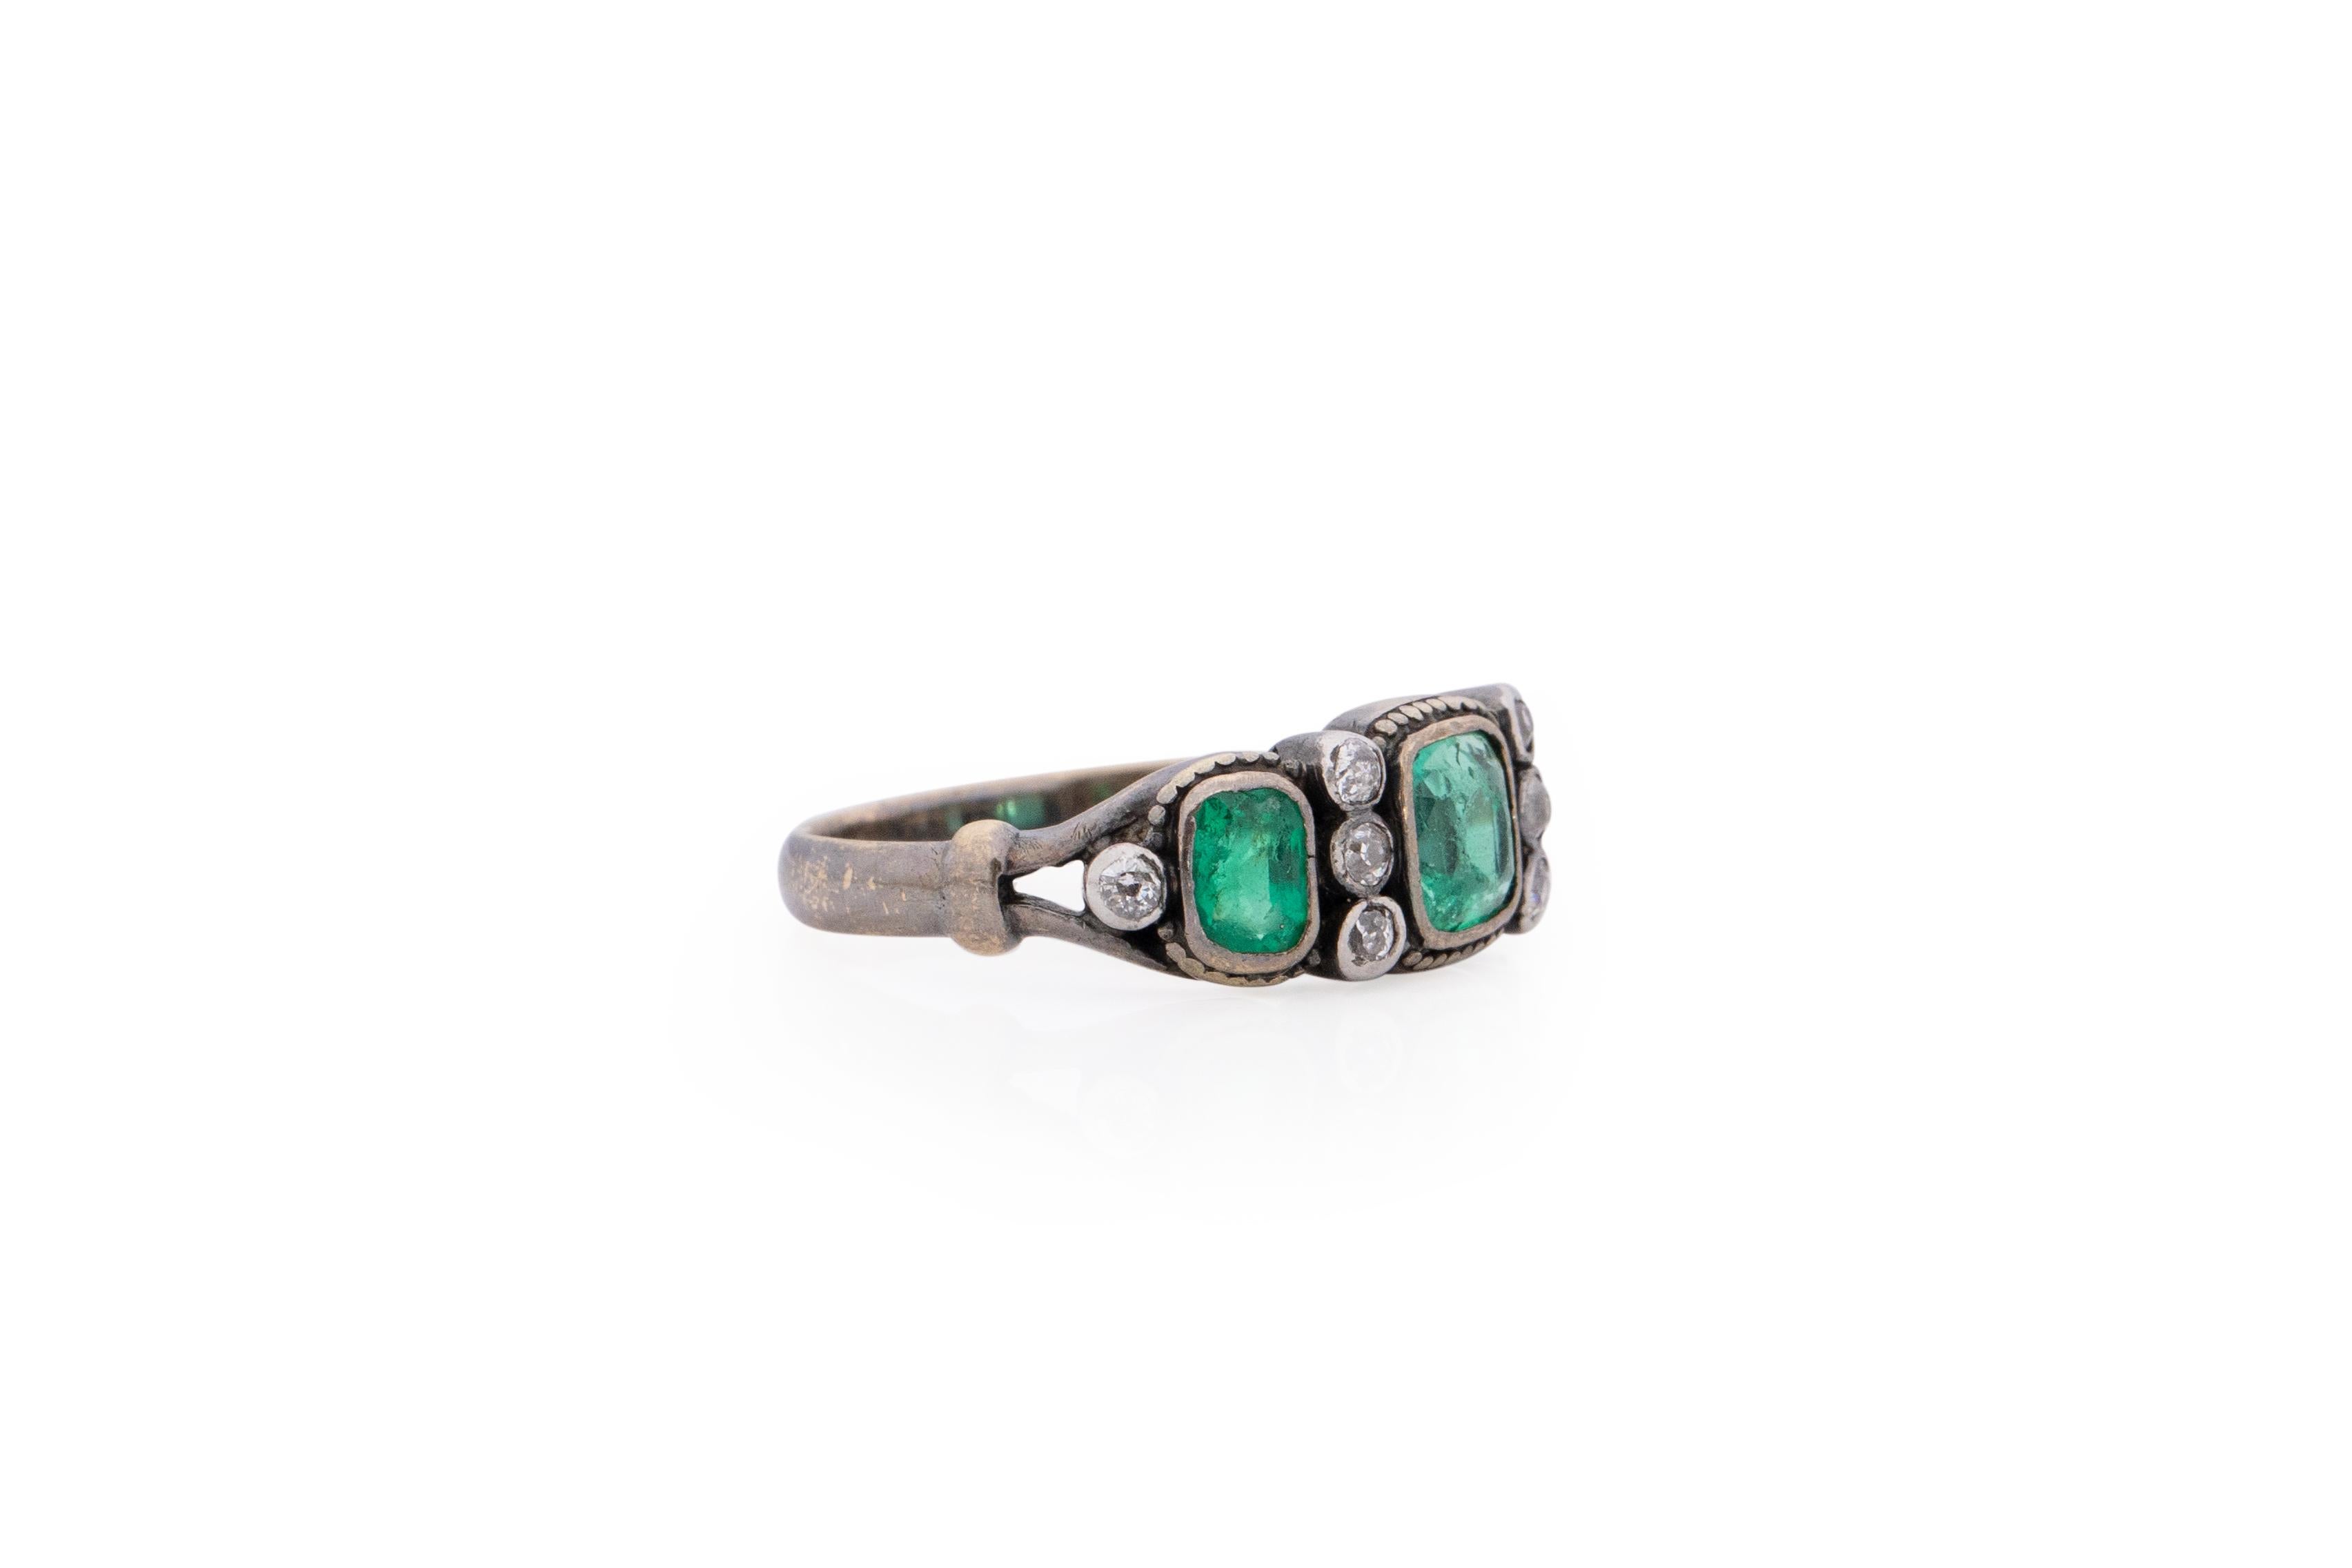 Item Details: 
Ring Size: 7.25
Metal Type: 14K Yellow Gold [Hallmarked, and Tested]
(Metal has patina, can be polished on purchase request. It is in its 100% original vintage condition!)
Weight: 3.5 grams

Emerald Details:
Weight: 1.40 carat, total